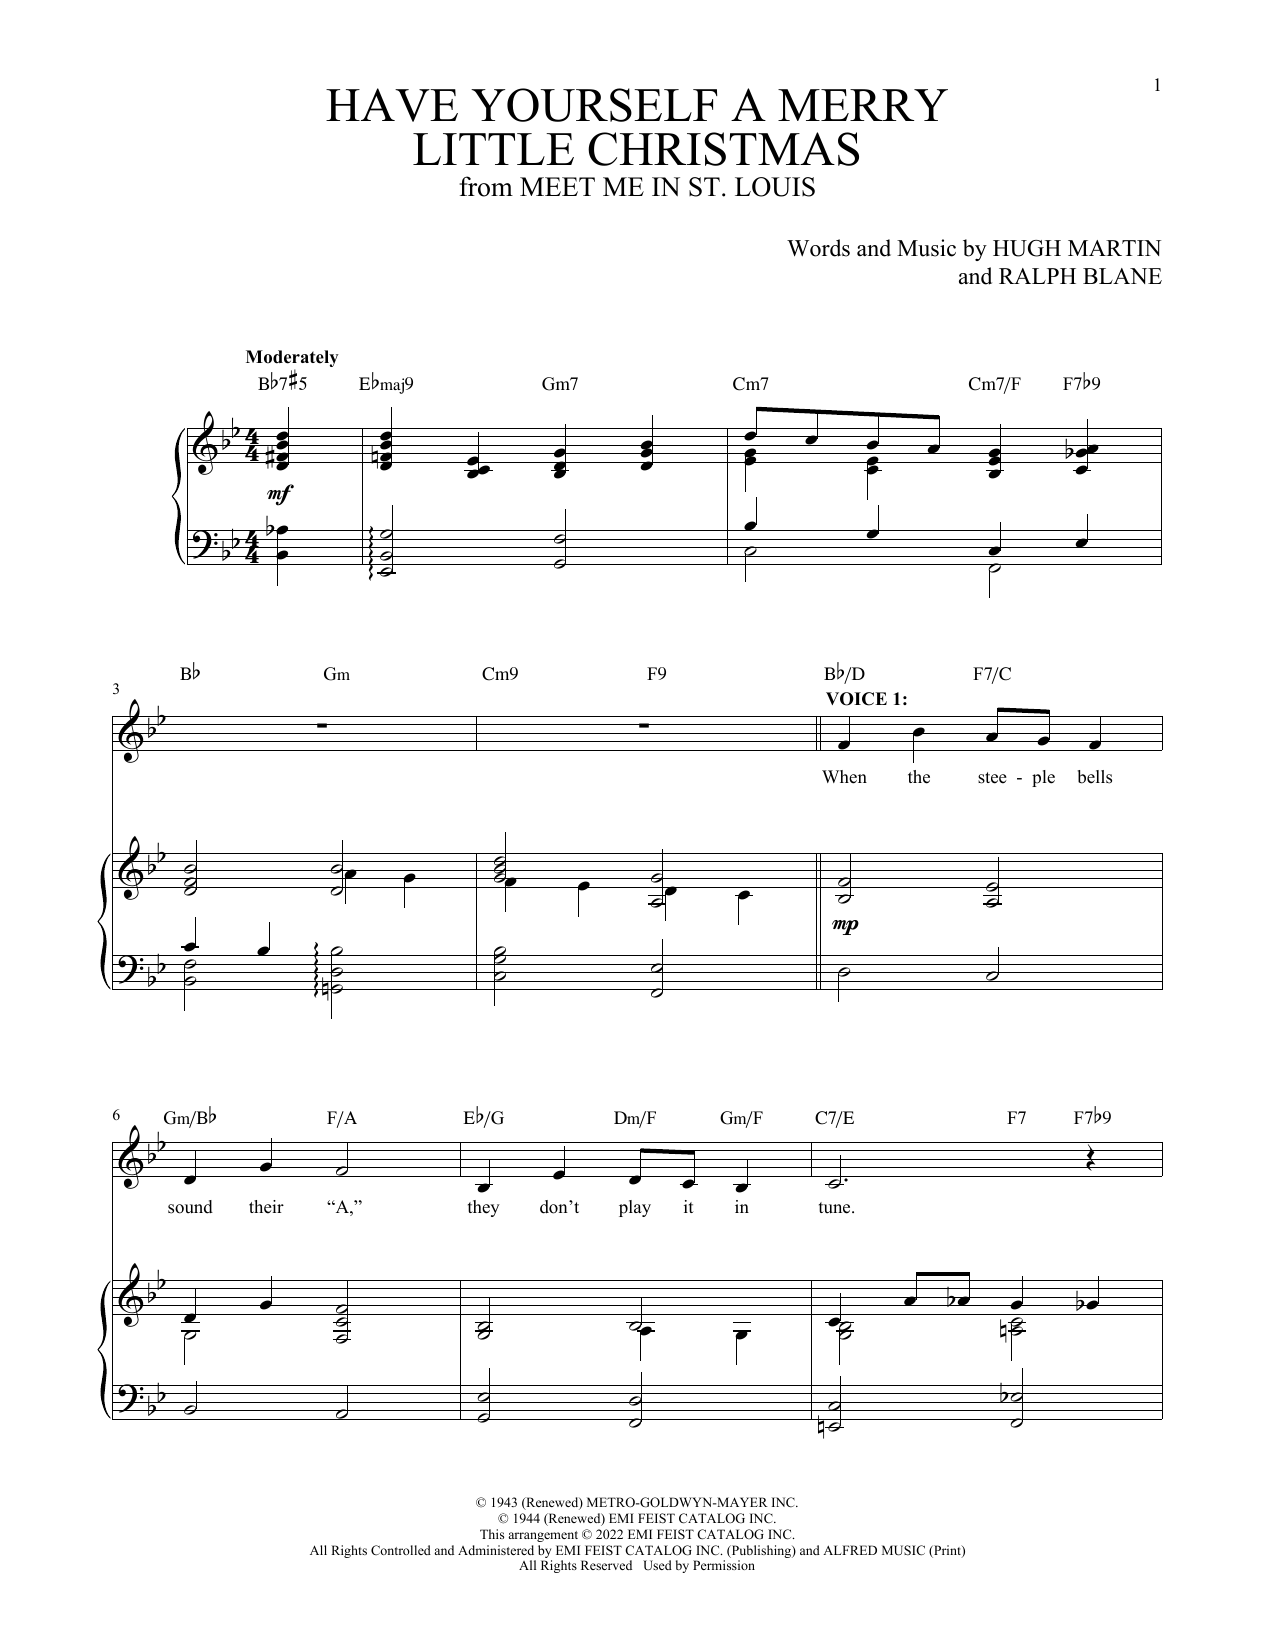 Download Frank Sinatra Have Yourself A Merry Little Christmas Sheet Music